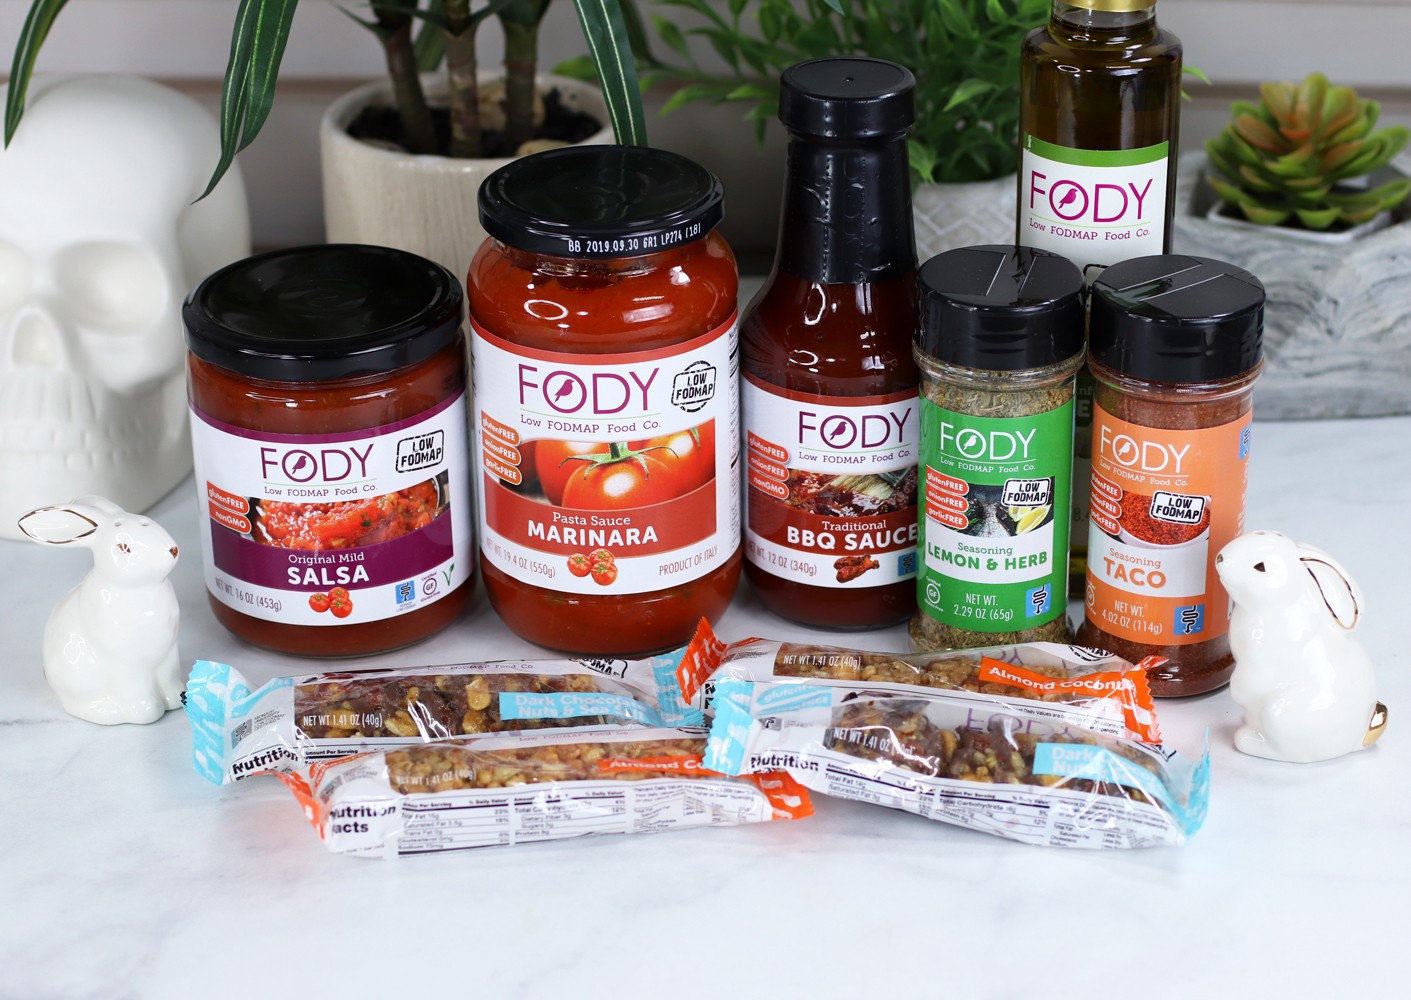 Fody Low FODMAP Foods Review by Los Angeles Heath Blogger My Beauty Bunny